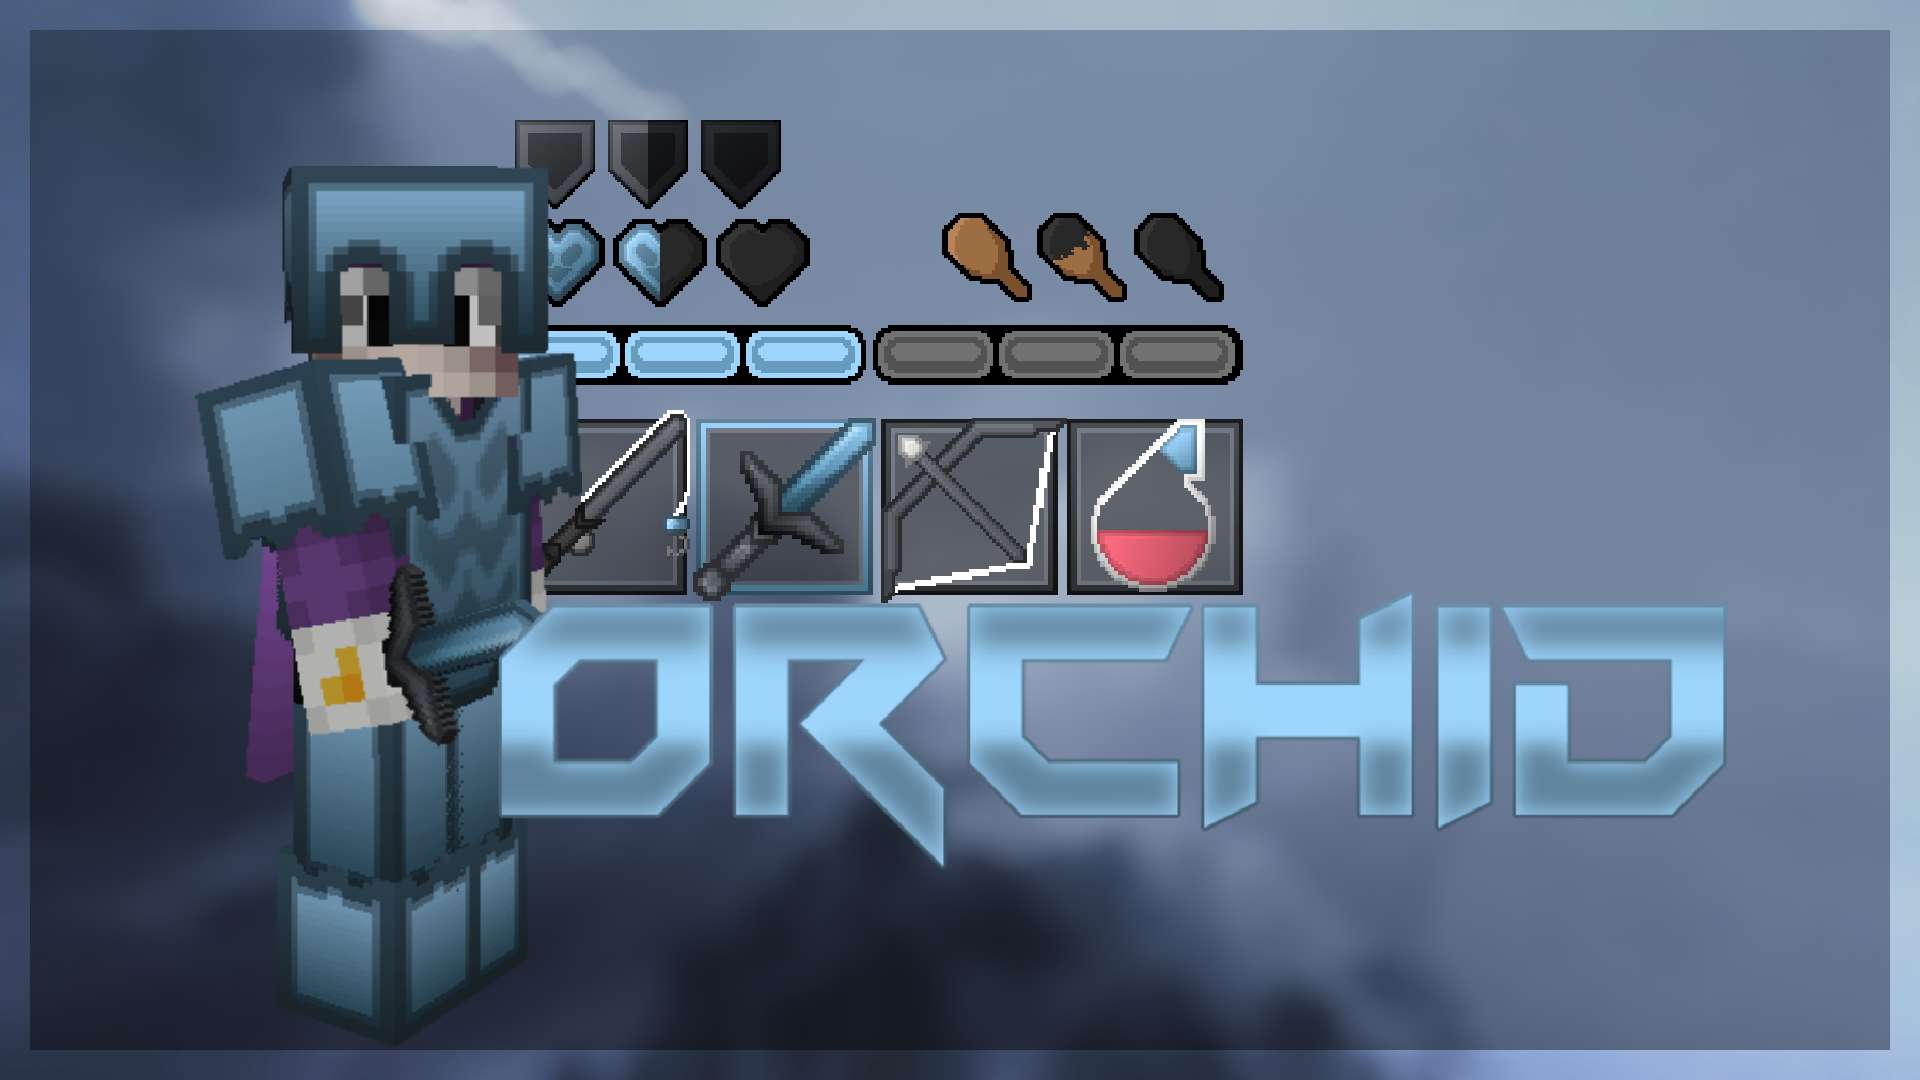 orchid 64 by CyberFUnction on PvPRP